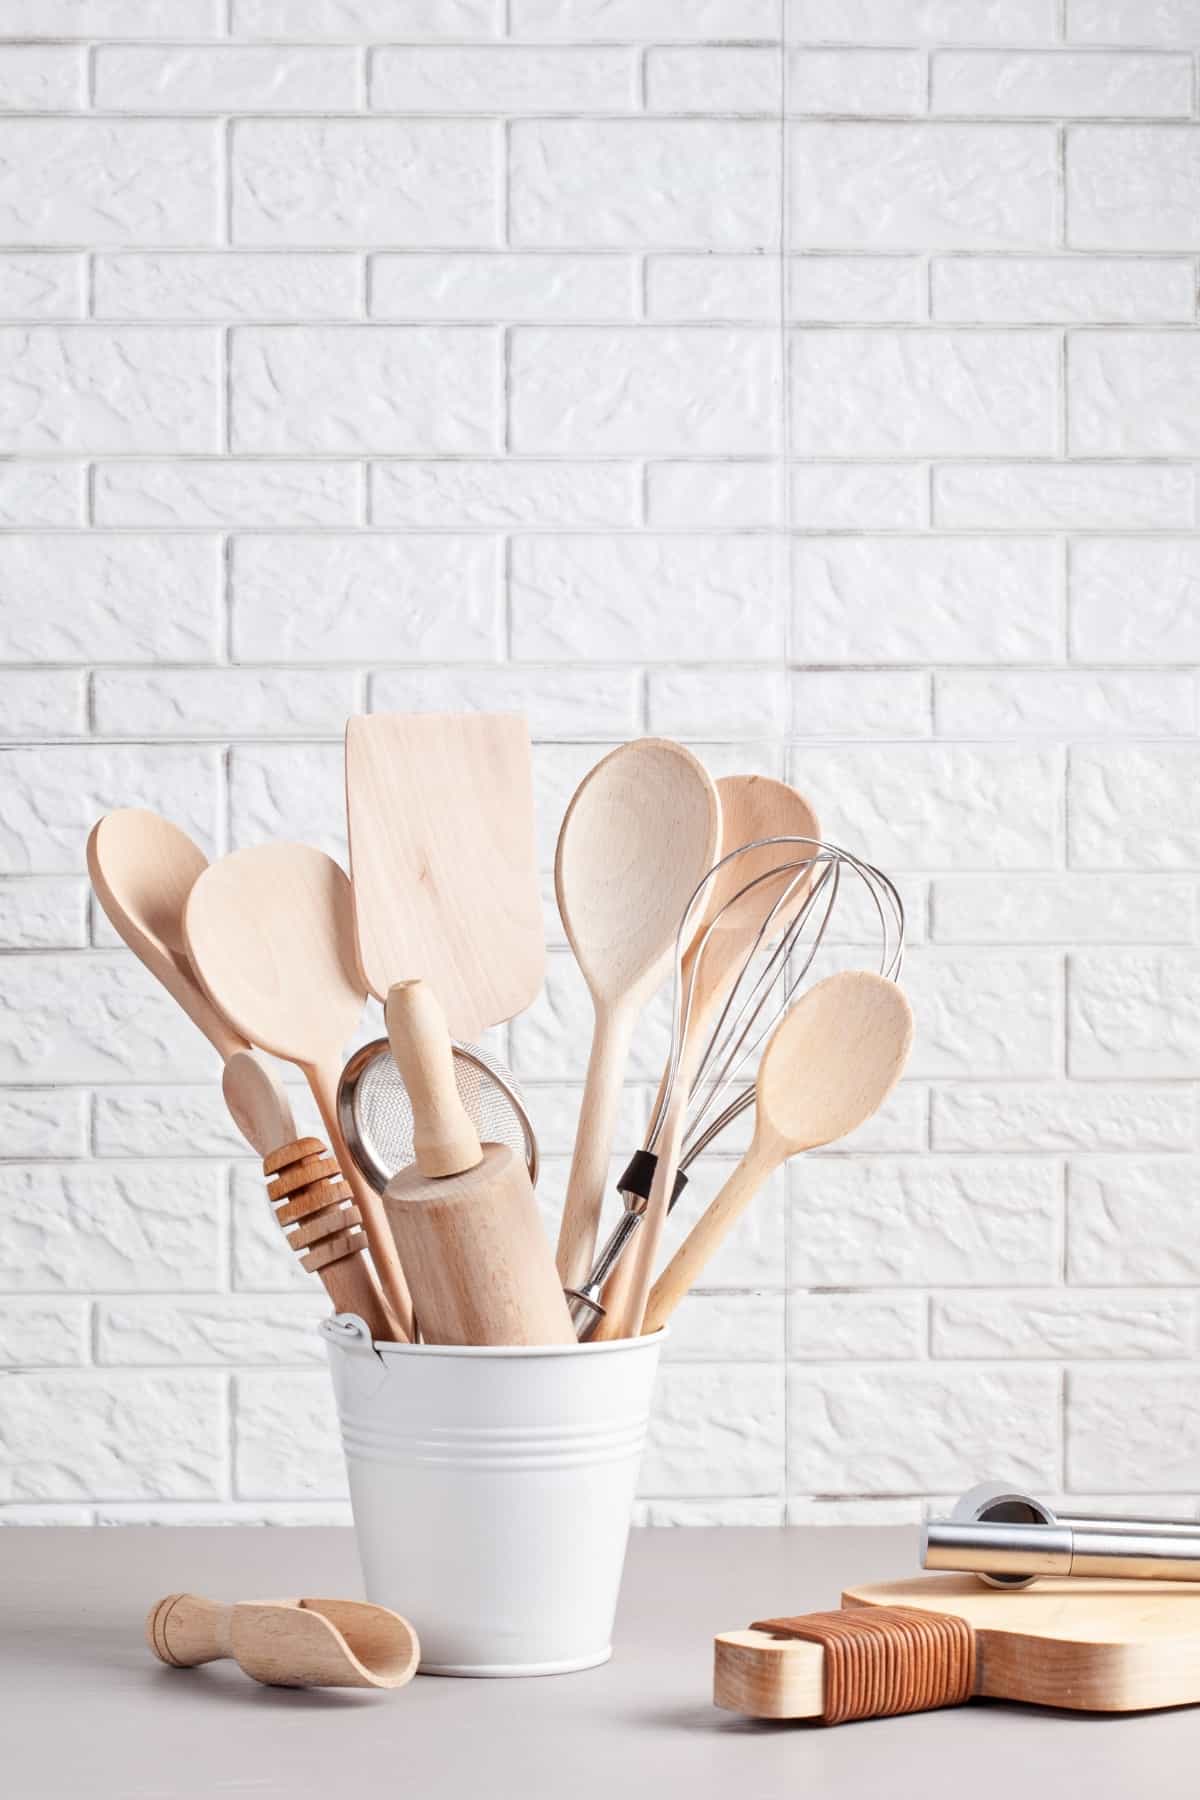 Baking utensils in a holder on a table